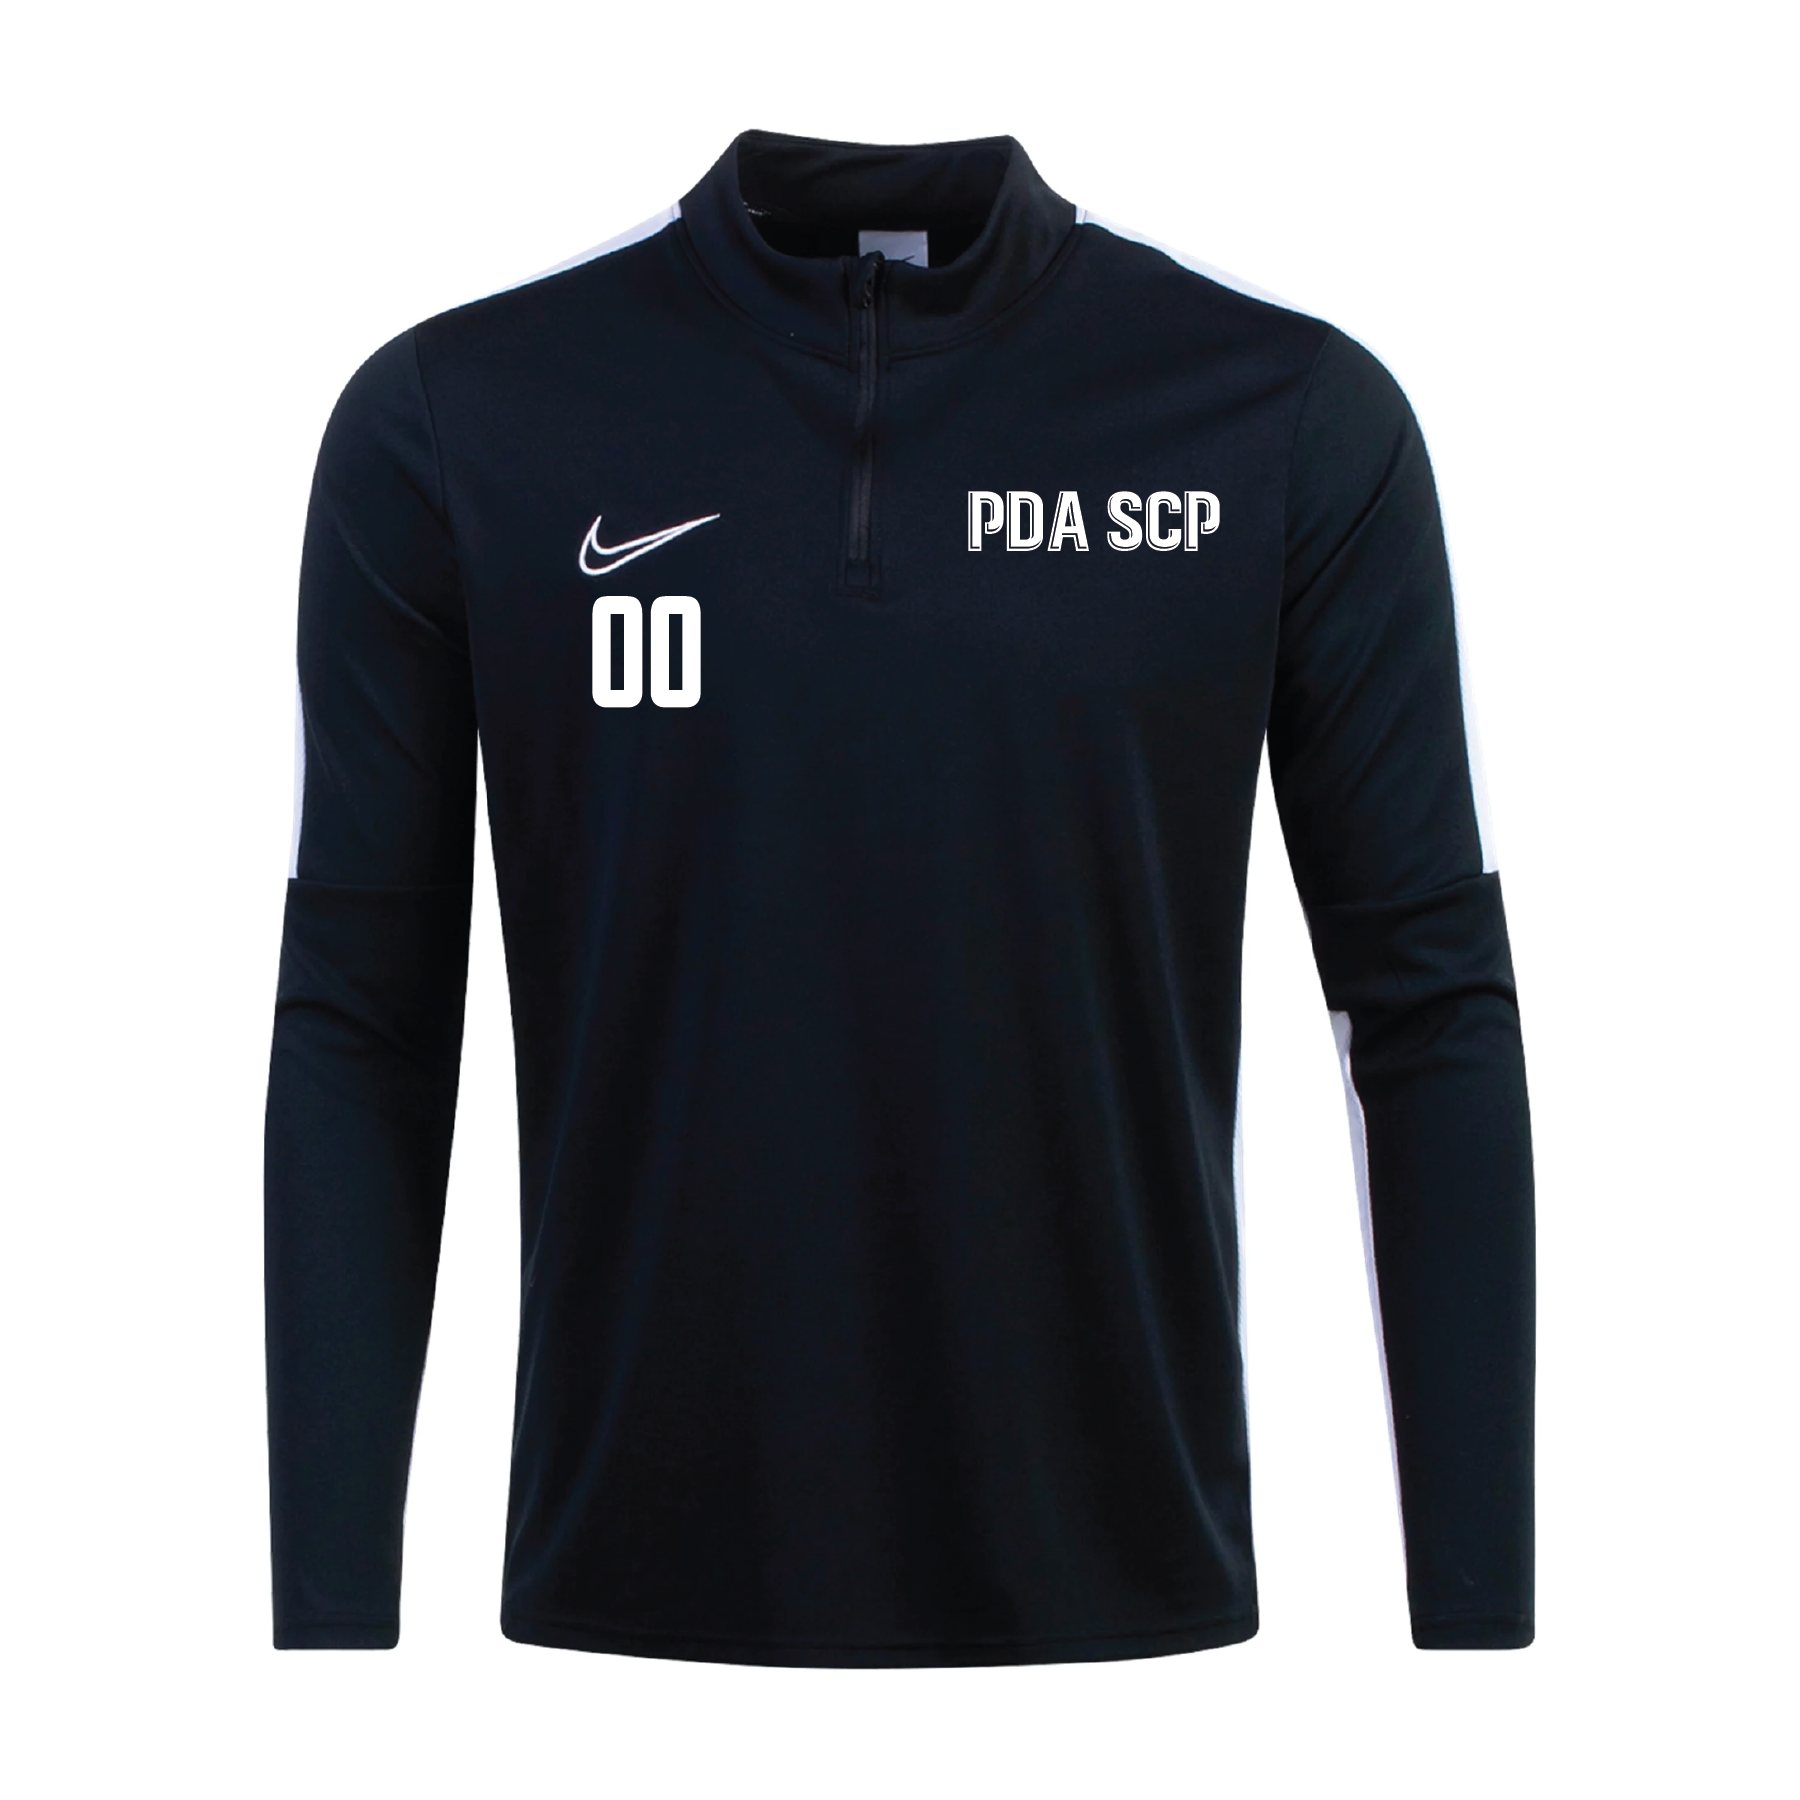 Nike Academy 23 Drill Top